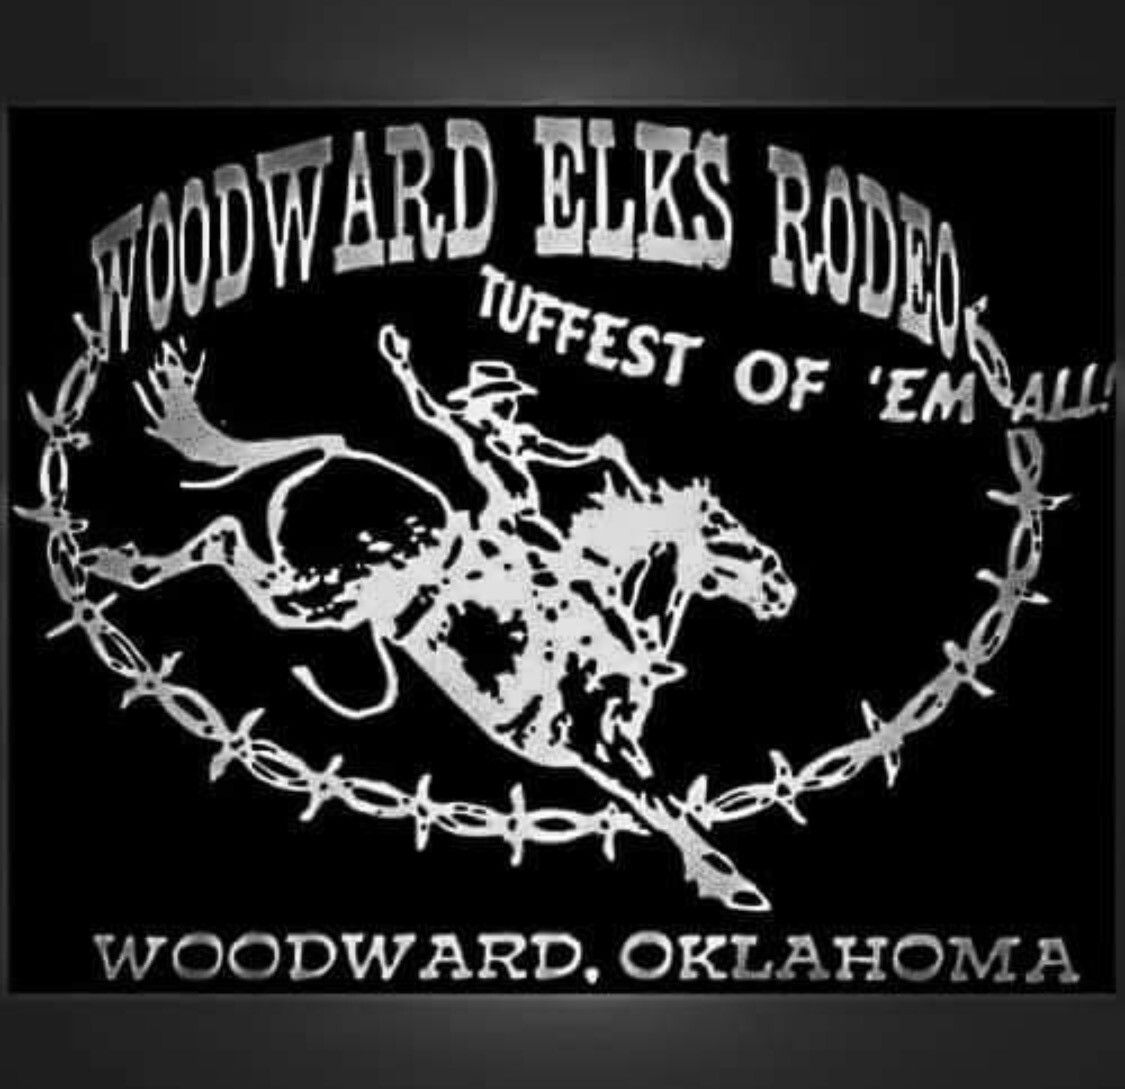 Woodward Elks Rodeo  (FRIDAY and SATURDAY- RODEO and DANCE) June 10-11 2022